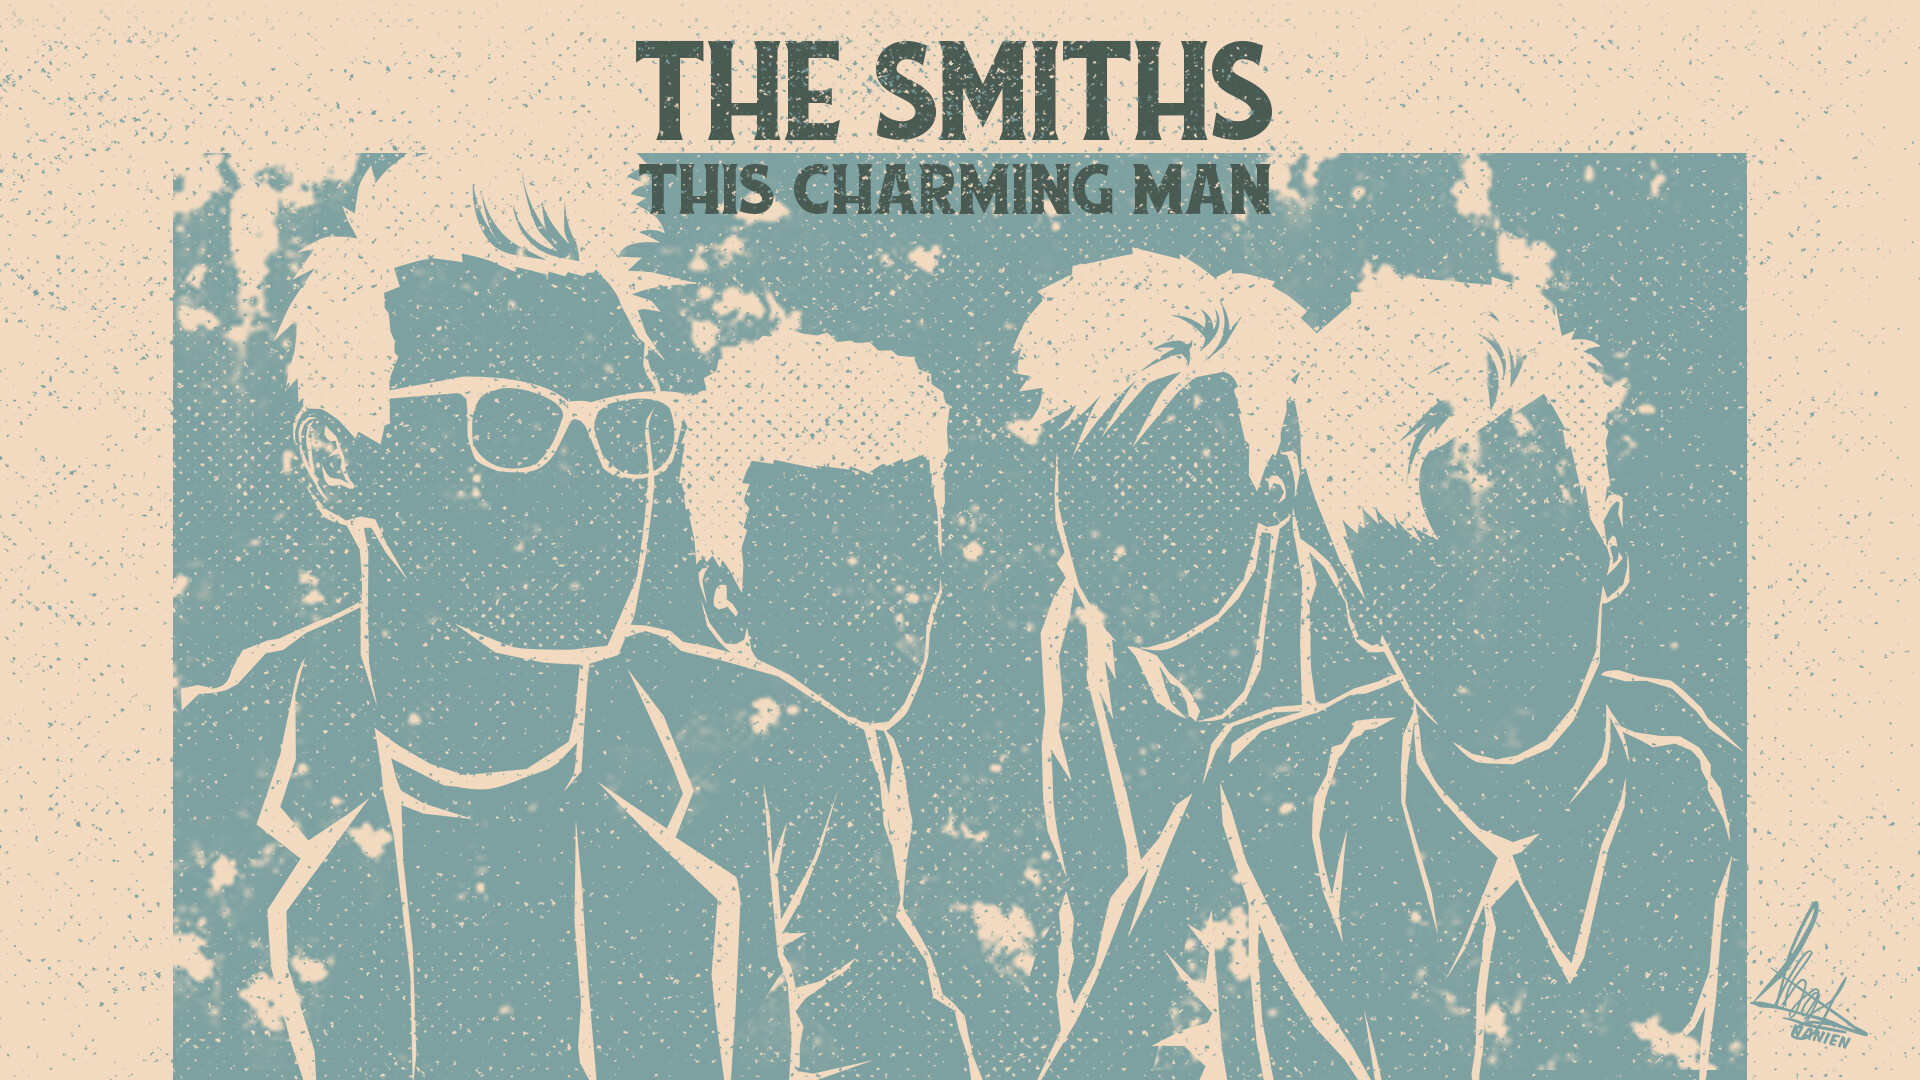 the smiths album covers wallpaper